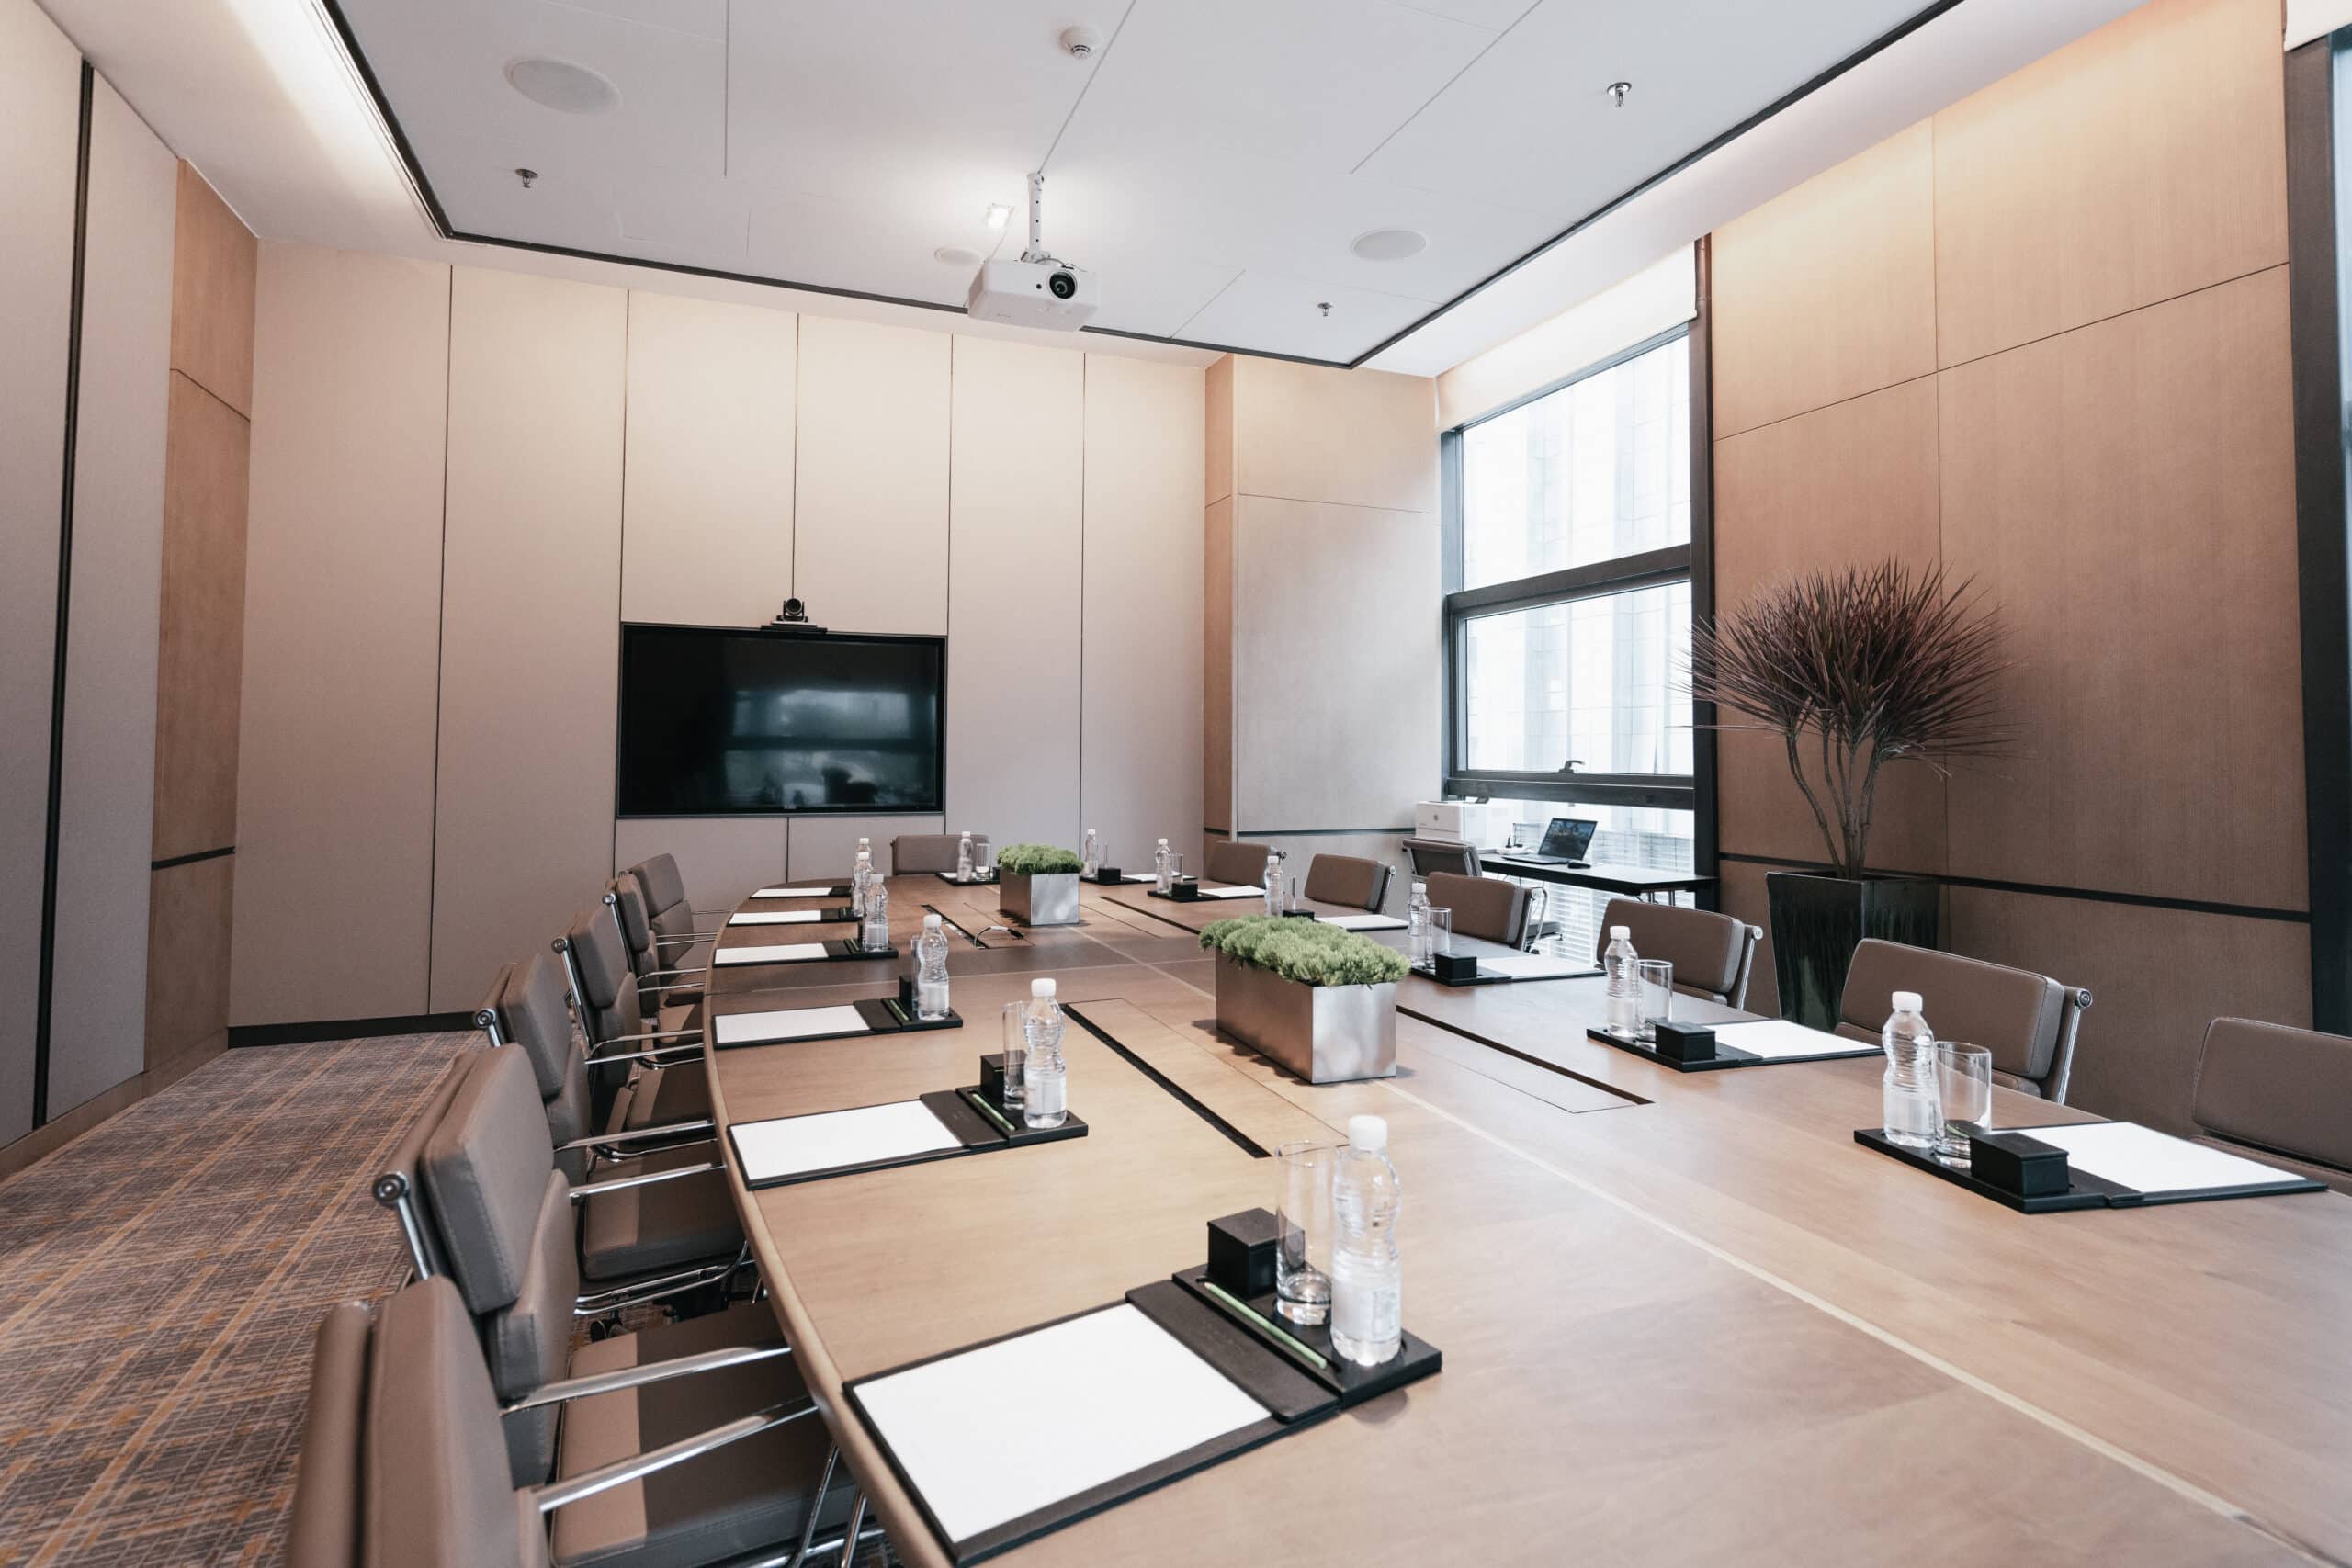 Advantages of Investing in Boardroom Upgrades